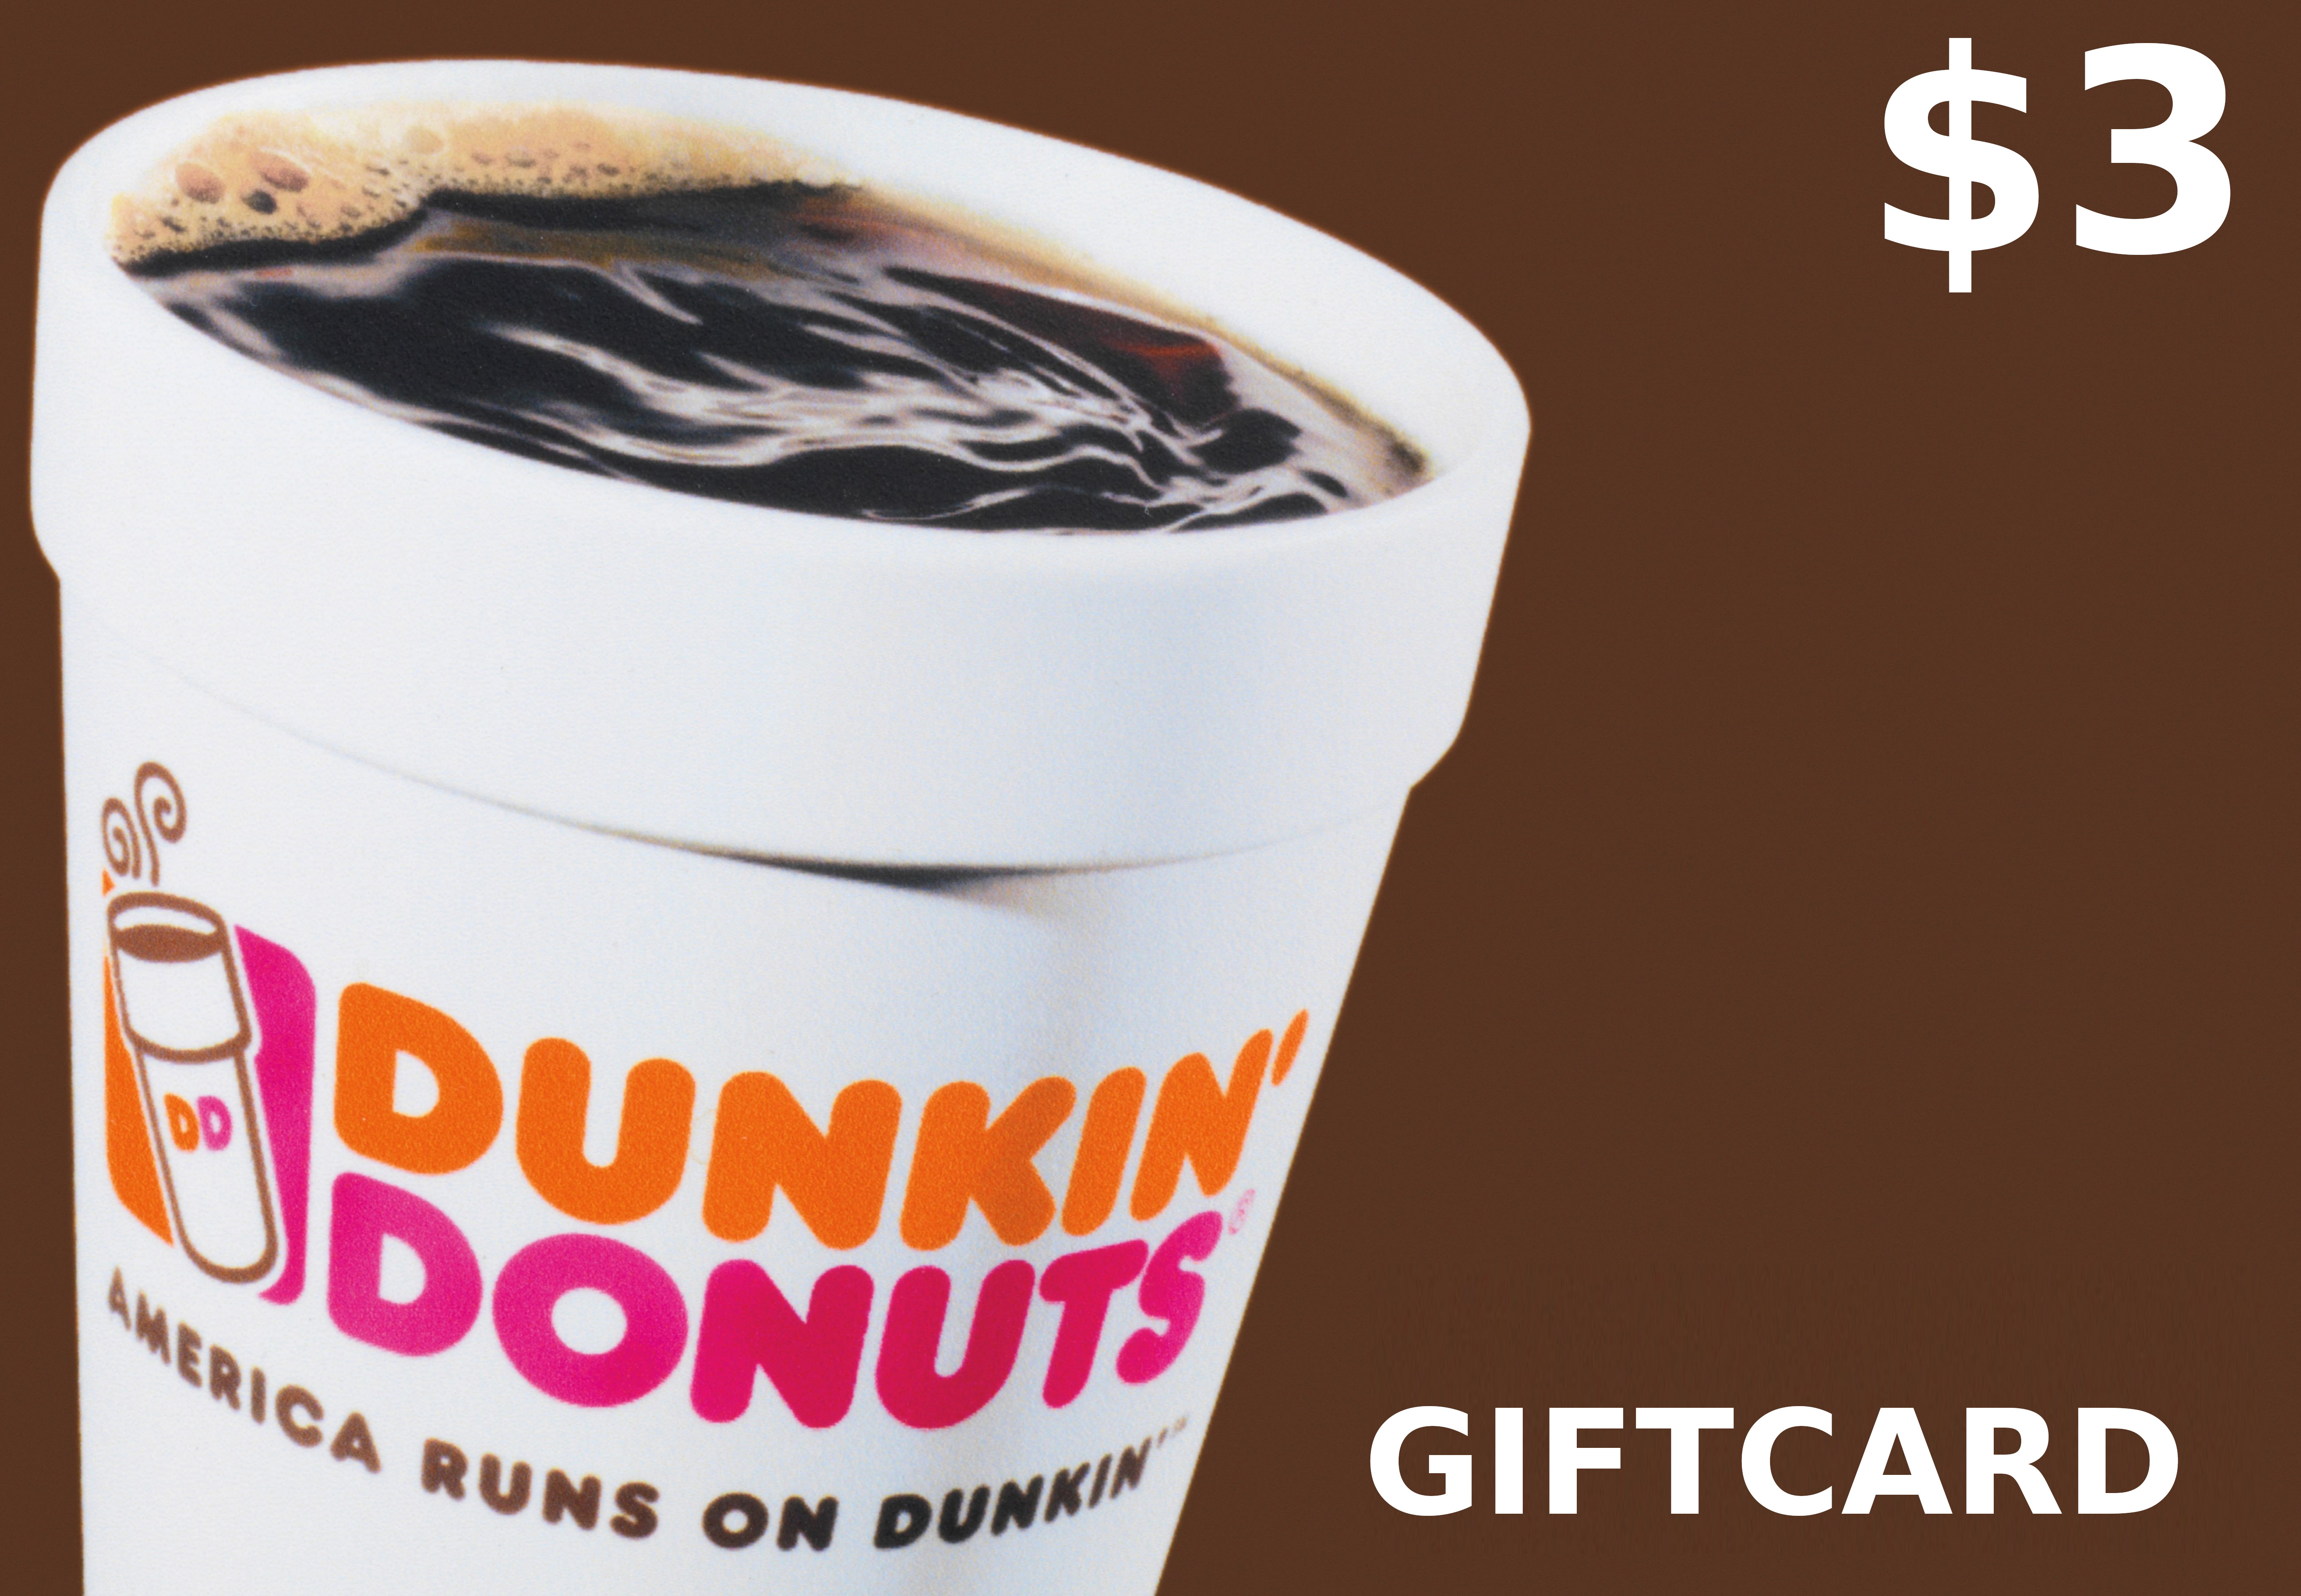 Dunkin Donuts $3 Gift Card US, 2.26 usd